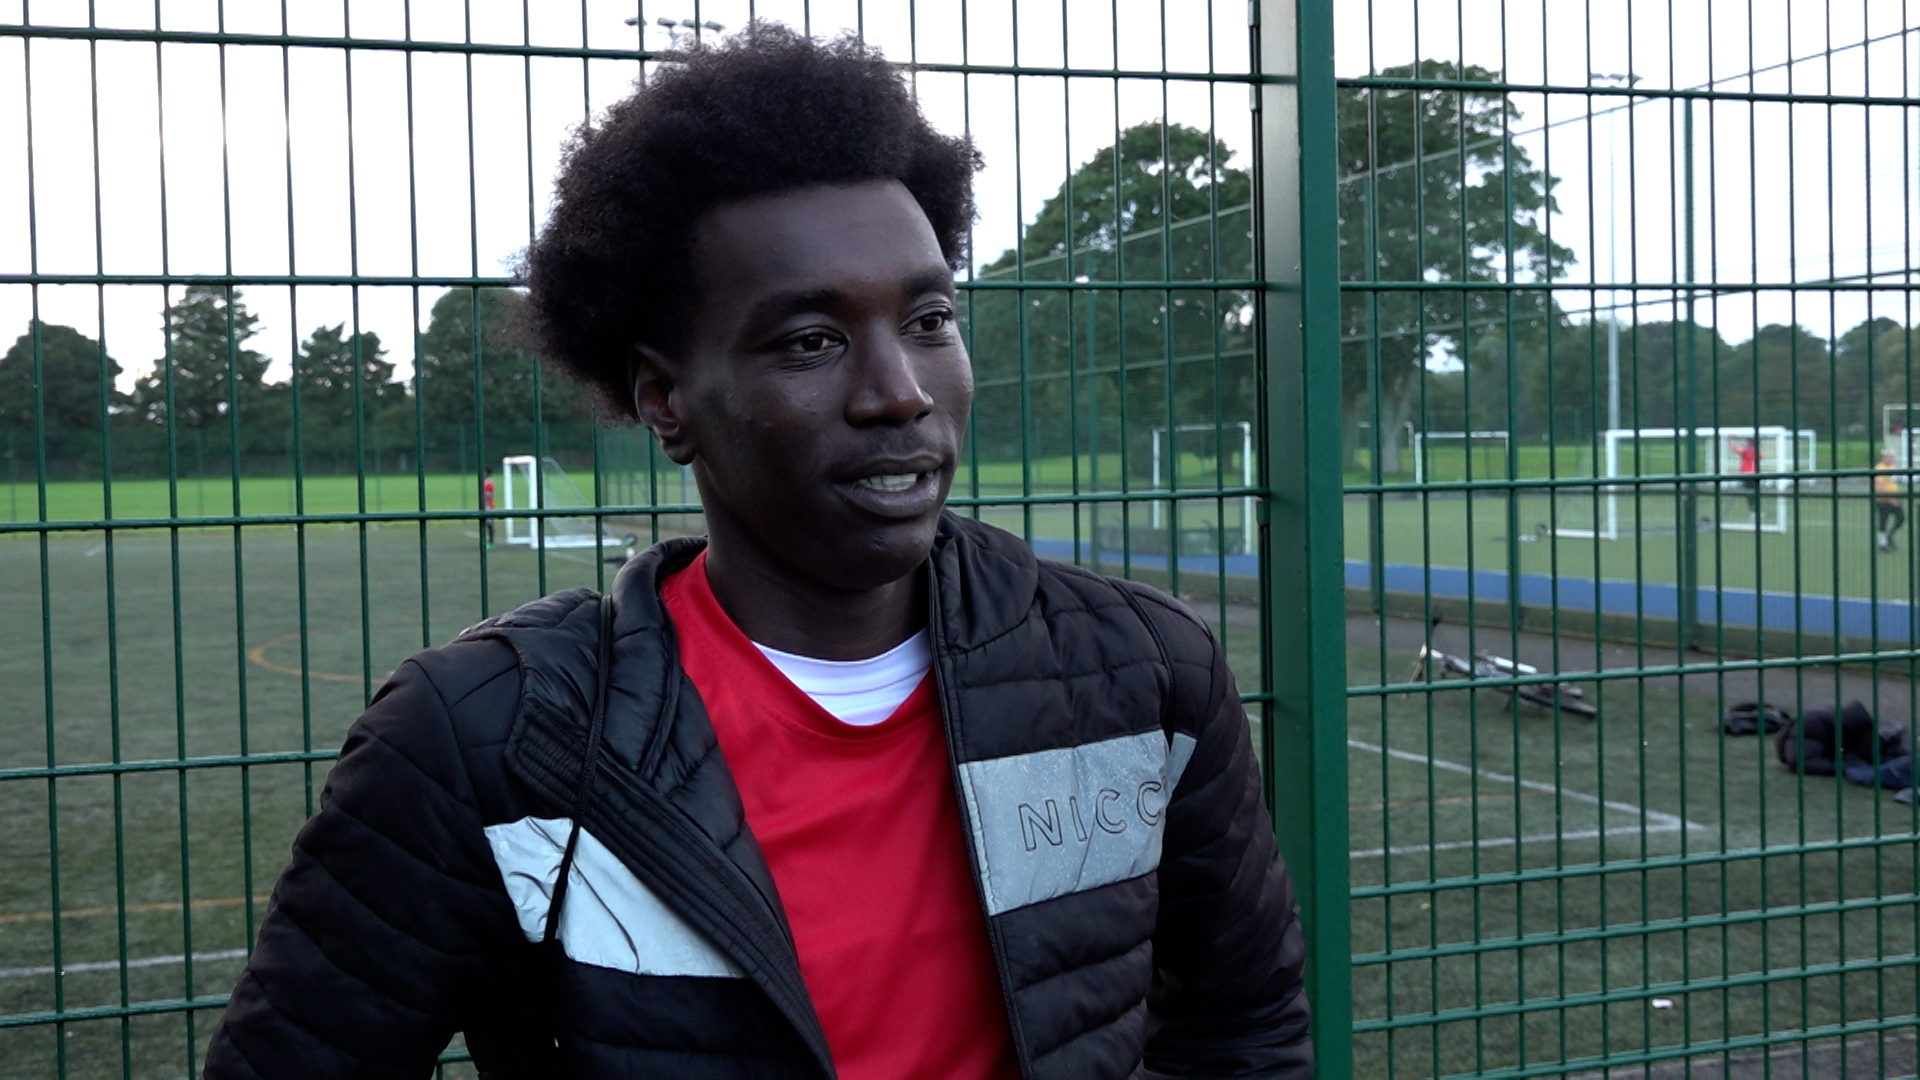 Abderauf Suliman made his journey to the UK alone from Sudan